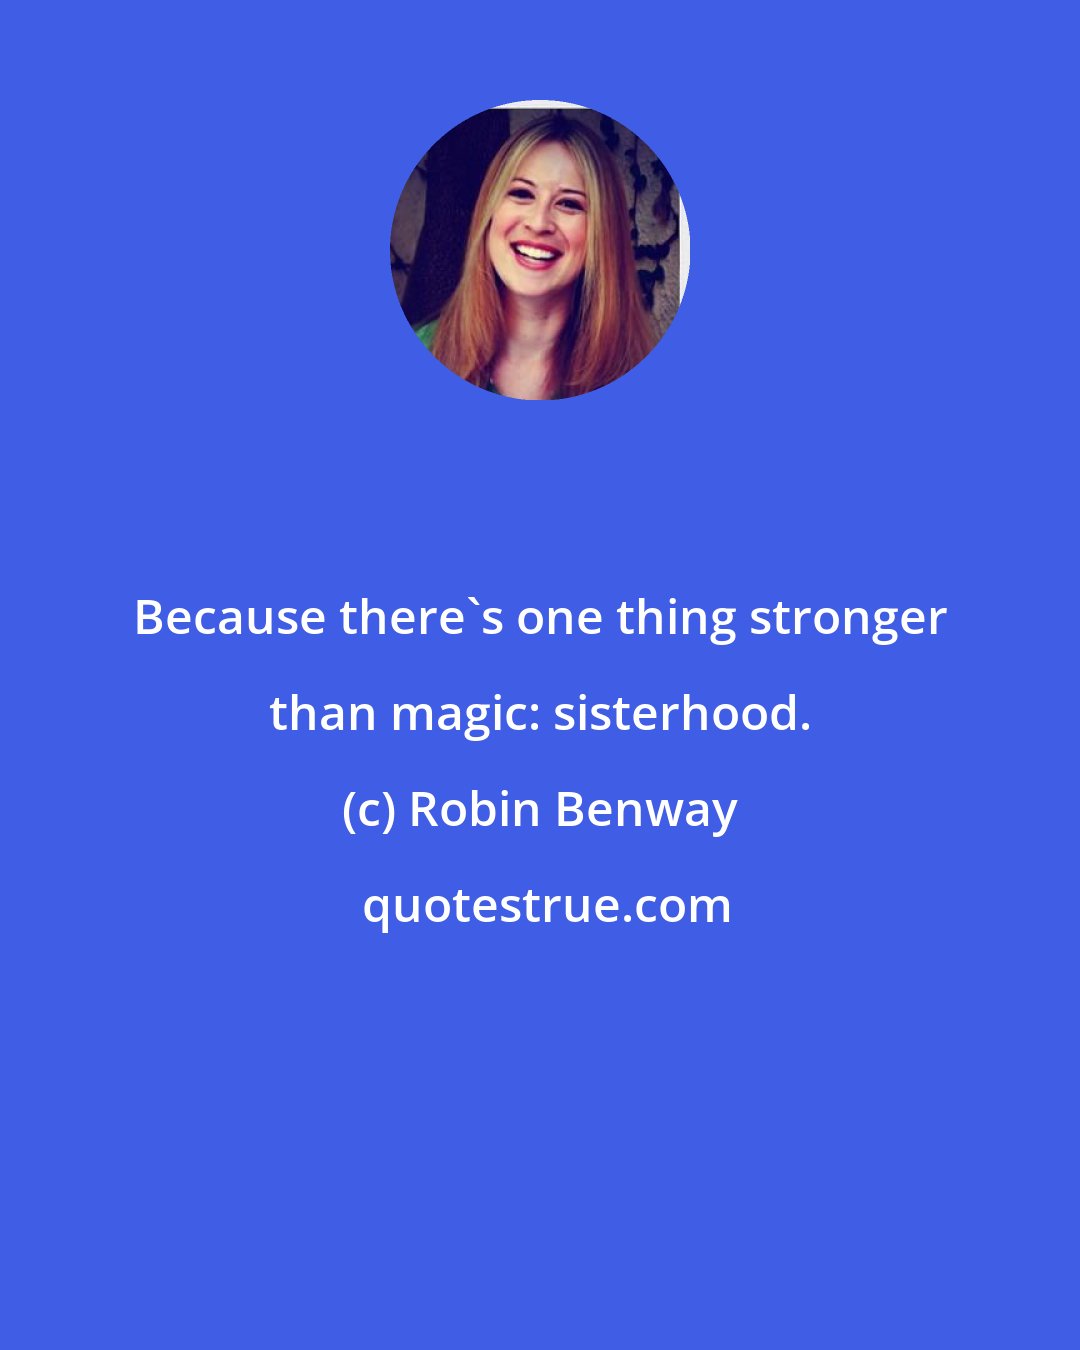 Robin Benway: Because there's one thing stronger than magic: sisterhood.